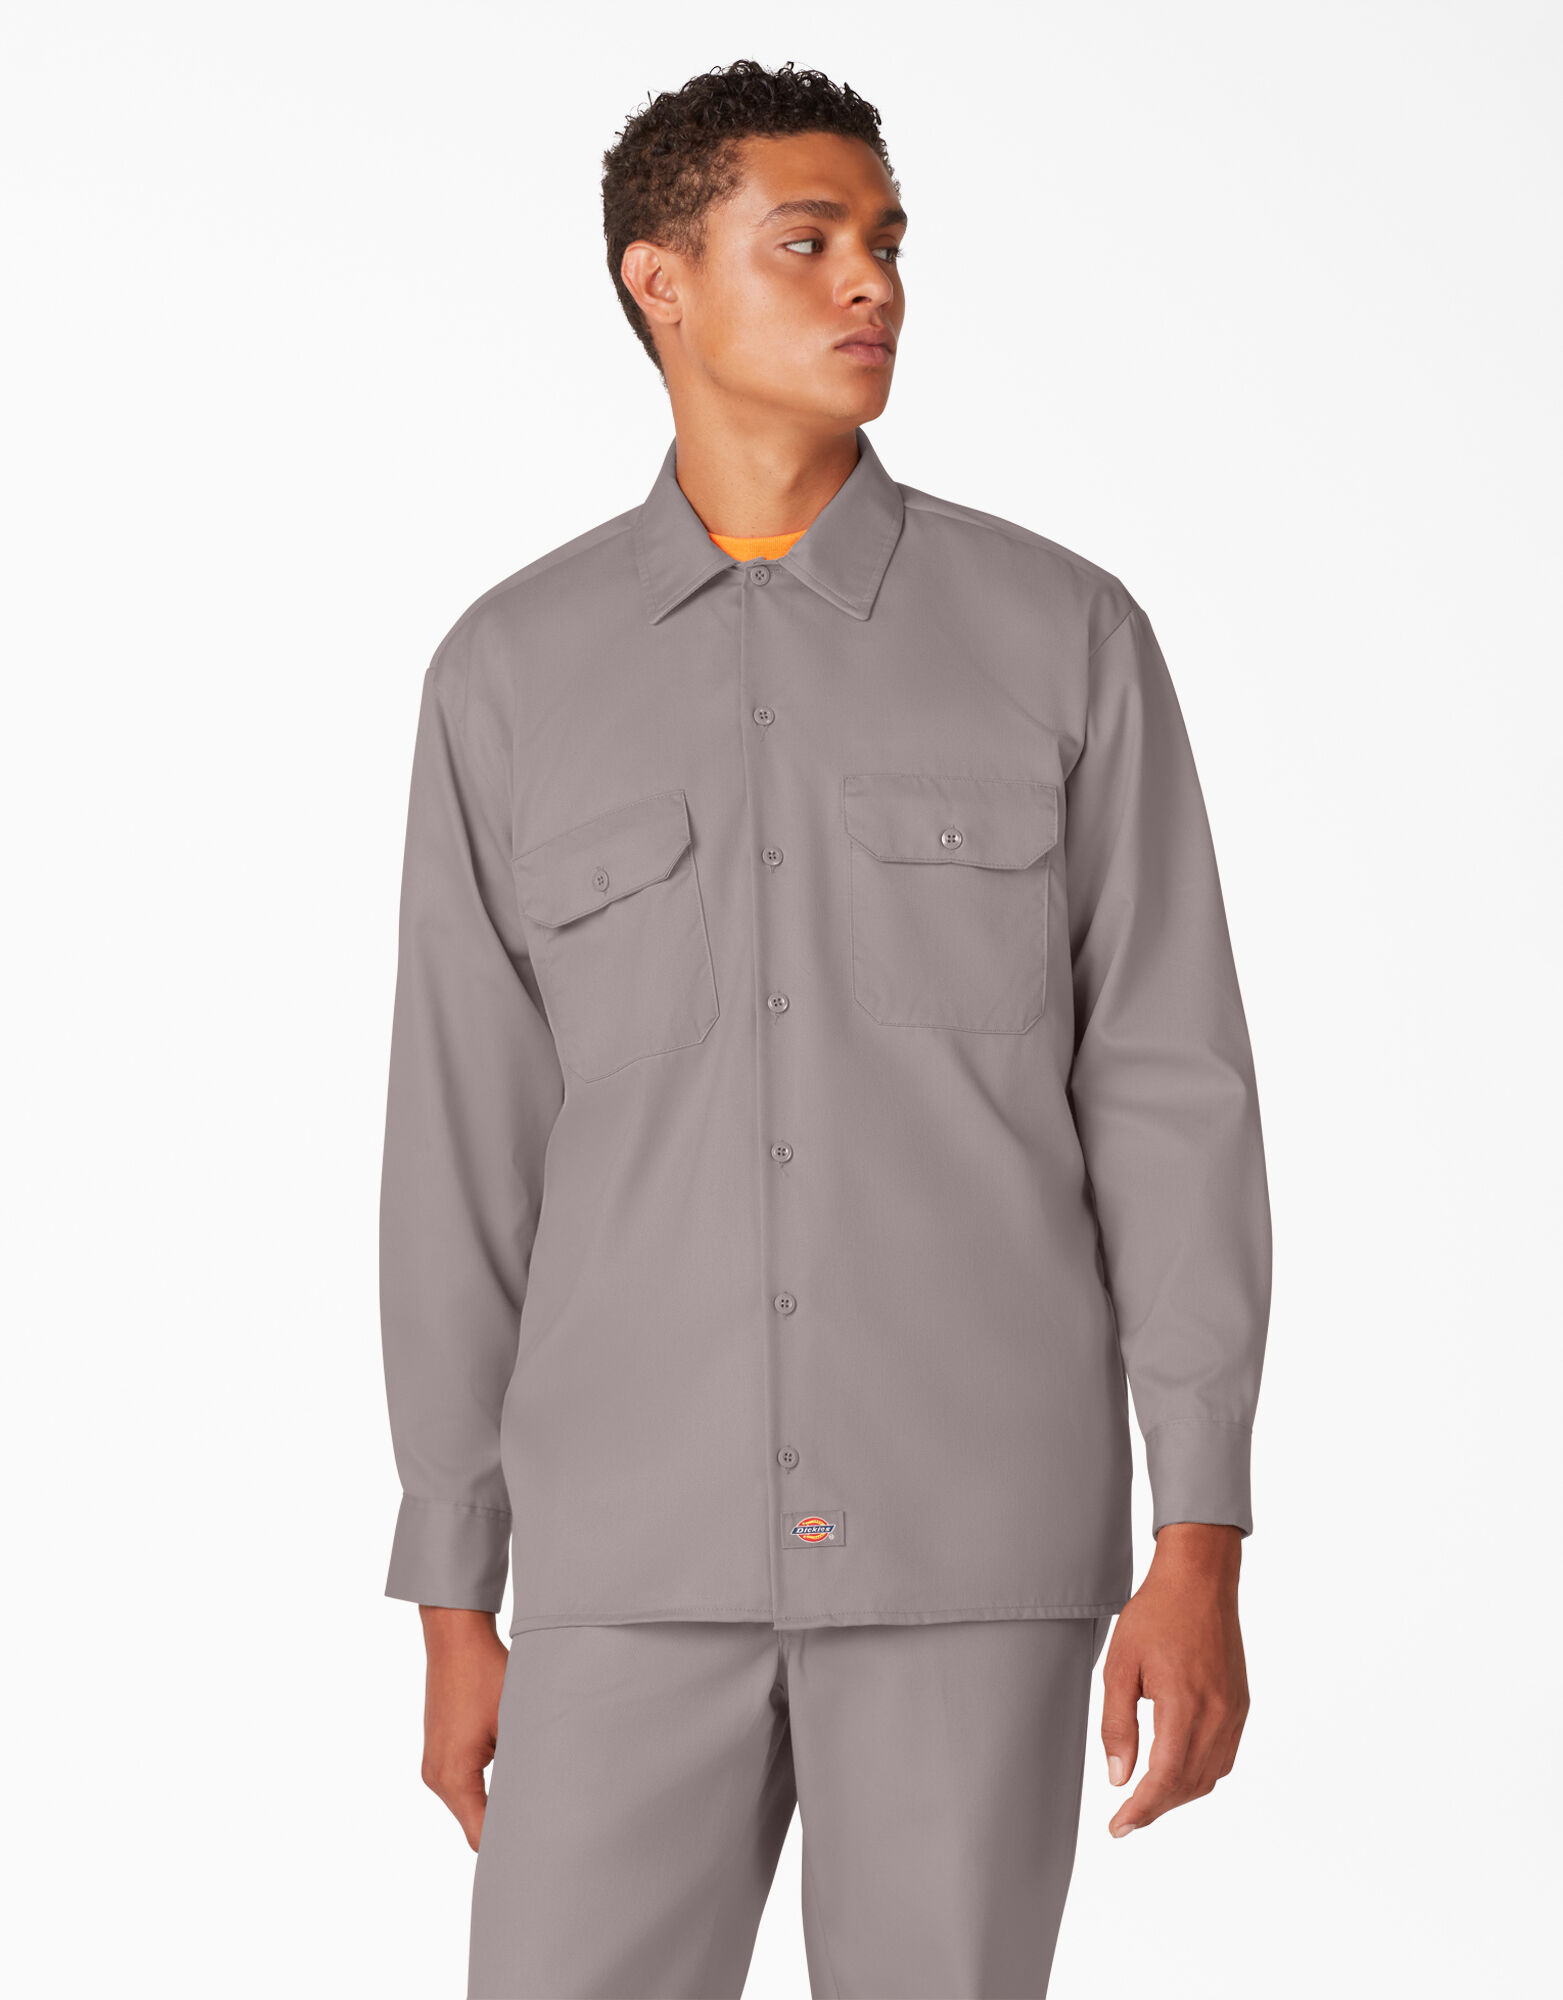 L Details about   Dickies Men's Long Sleeve Work Shirt